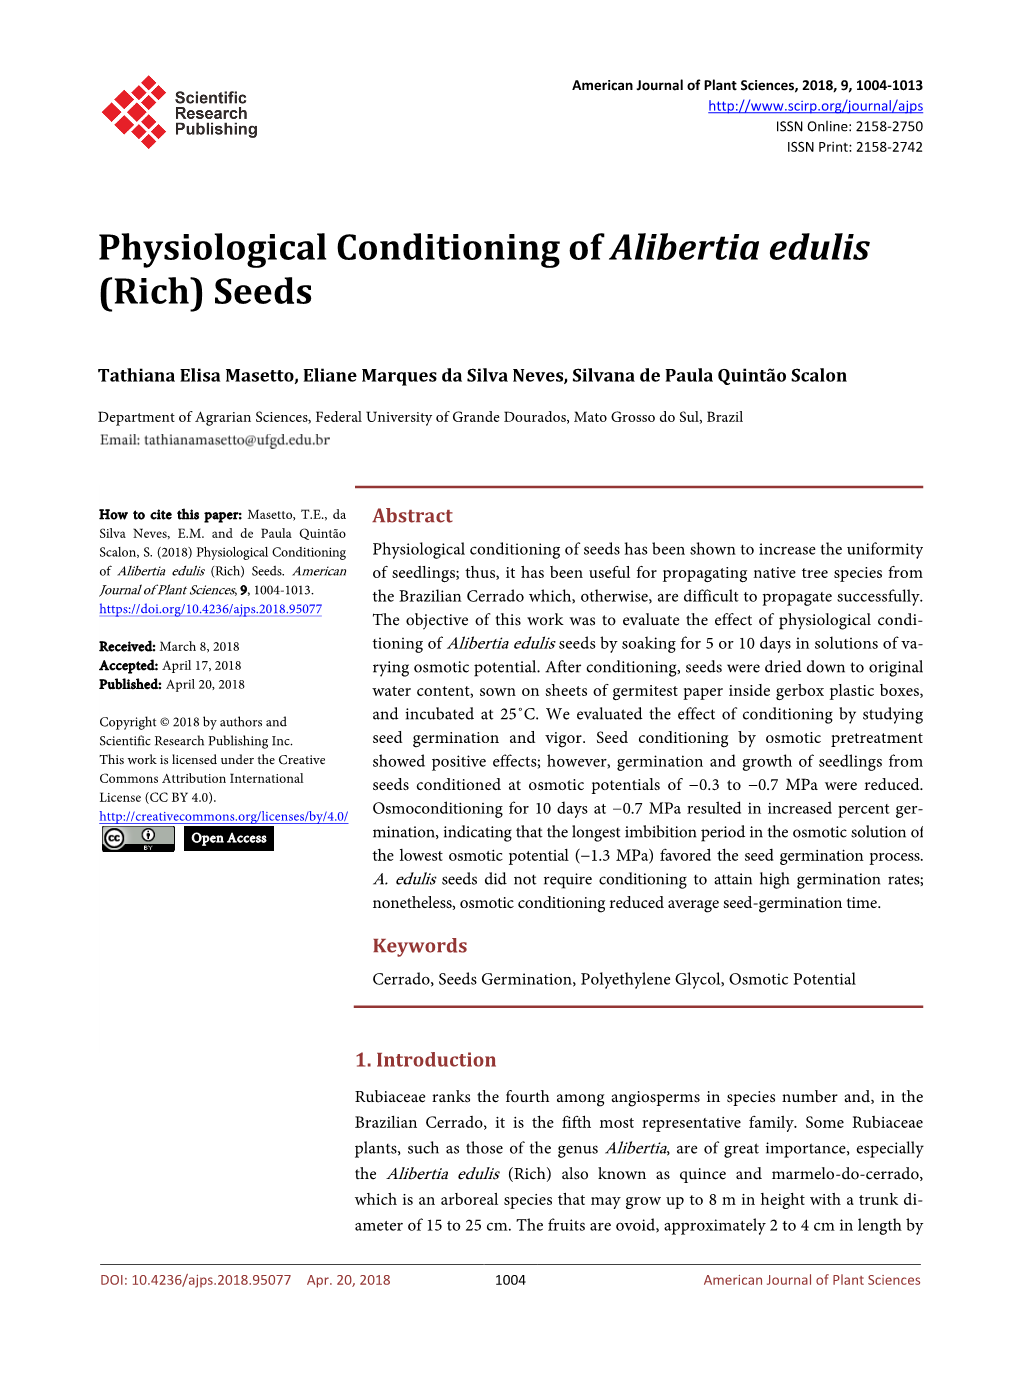 Physiological Conditioning of Alibertia Edulis (Rich) Seeds